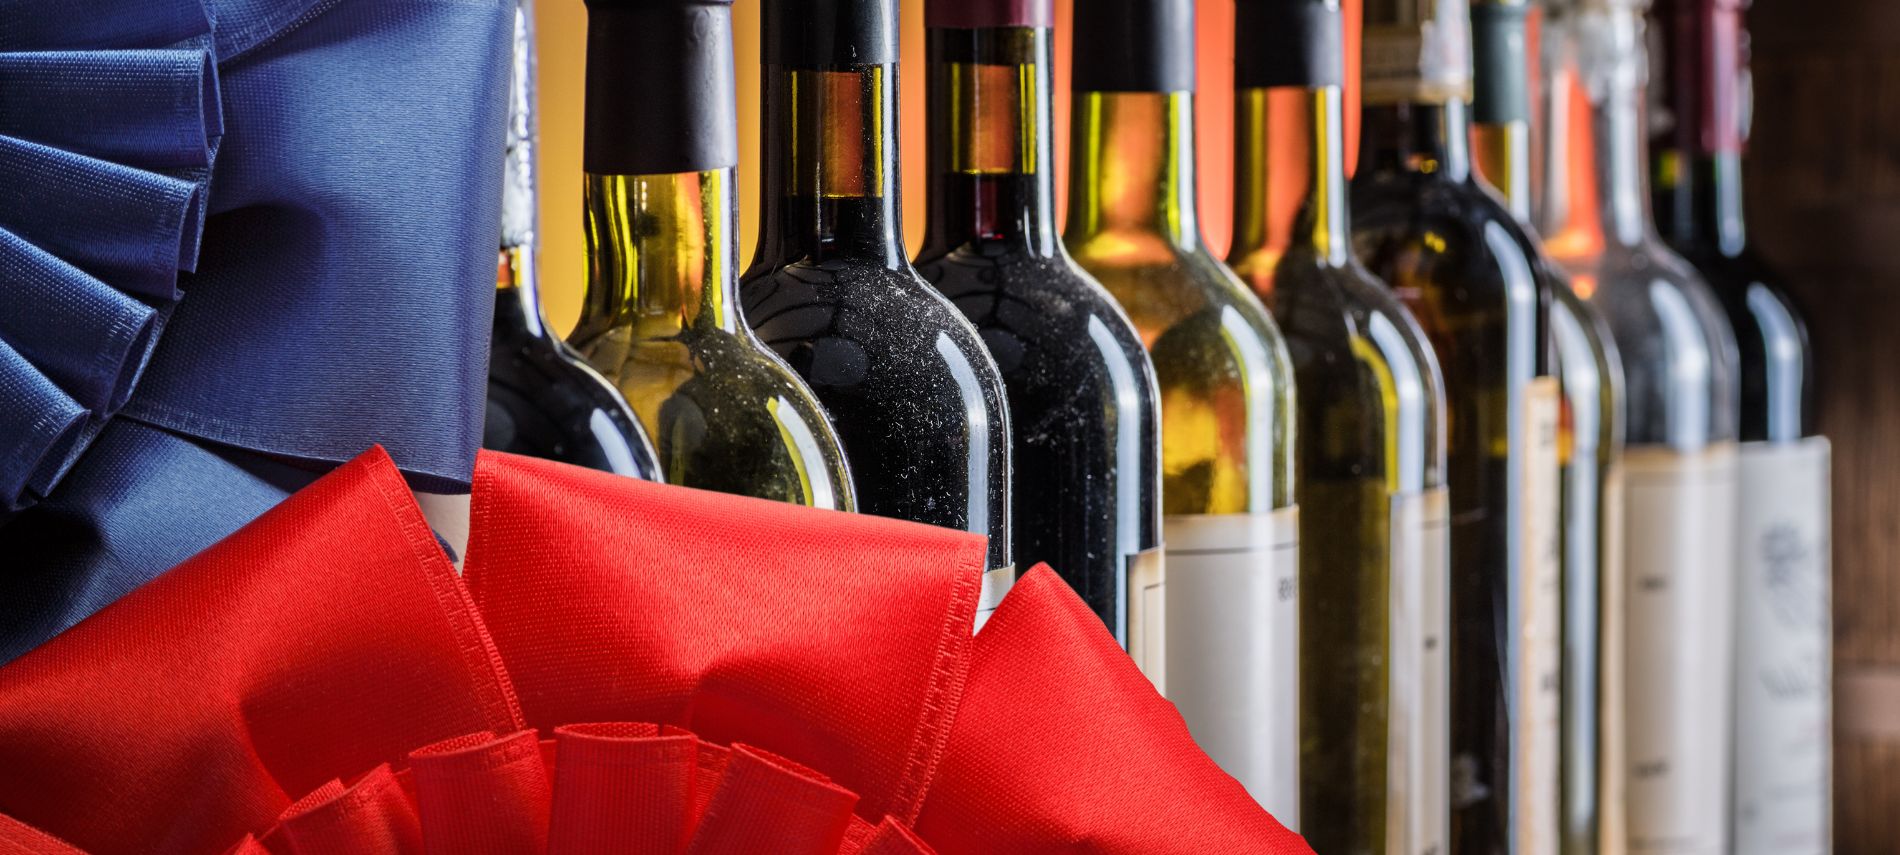 A row of wine bottles with portions of red and blue ribbons on the left side and corner.